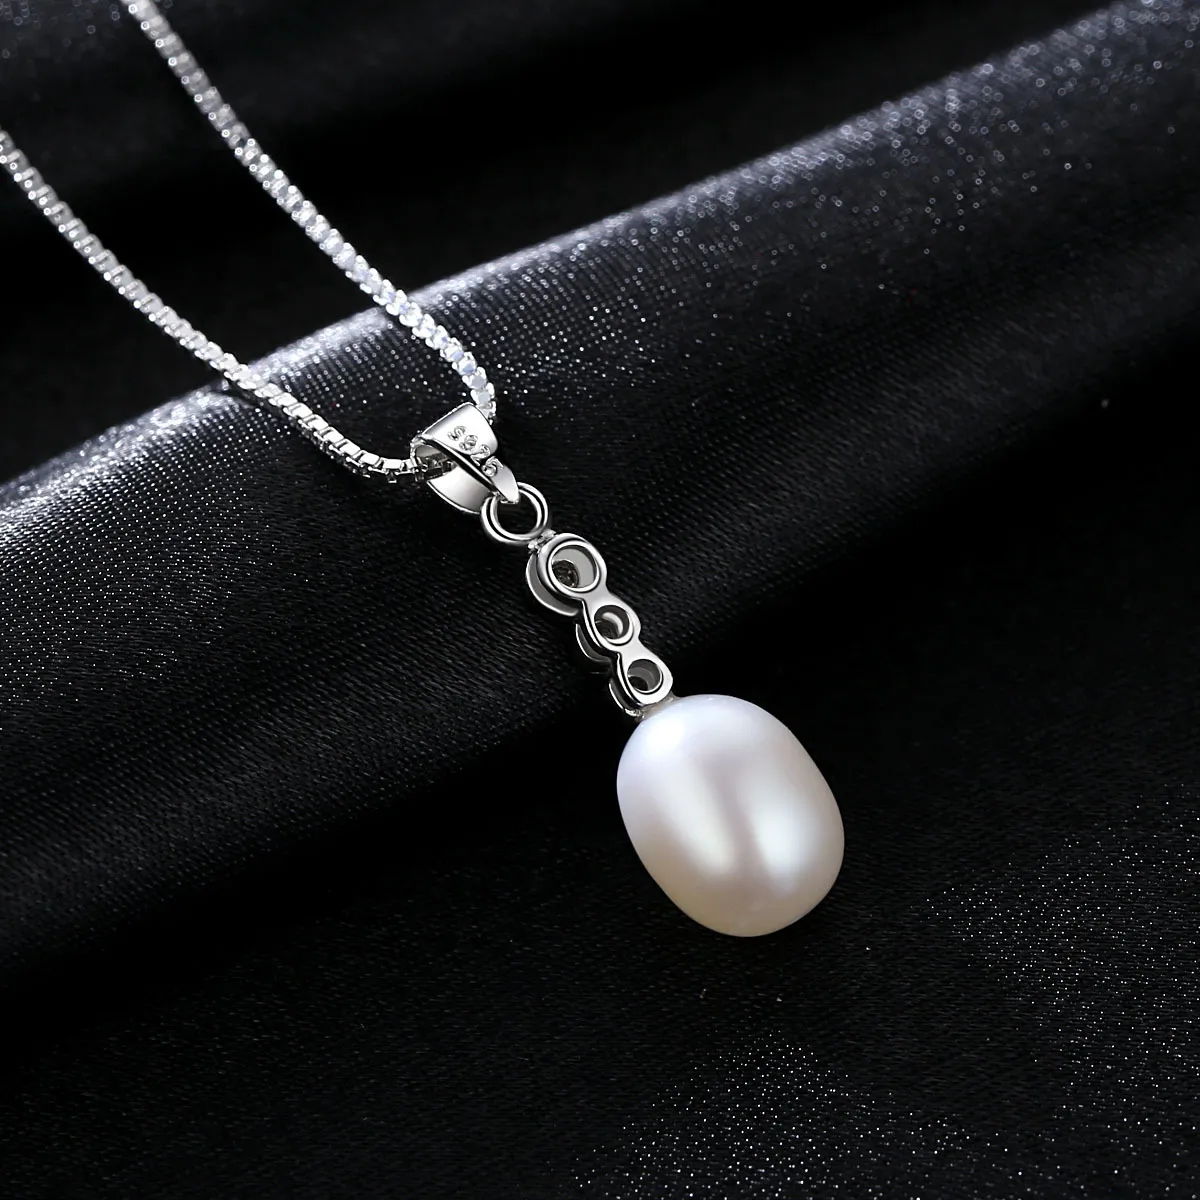 Korean Fashion Freshwater Pearl s925 Silver Pendant Necklace Women Jewelry Charm lady Shiny Zircon Collar Chain Exquisite Necklace Accessories Gift